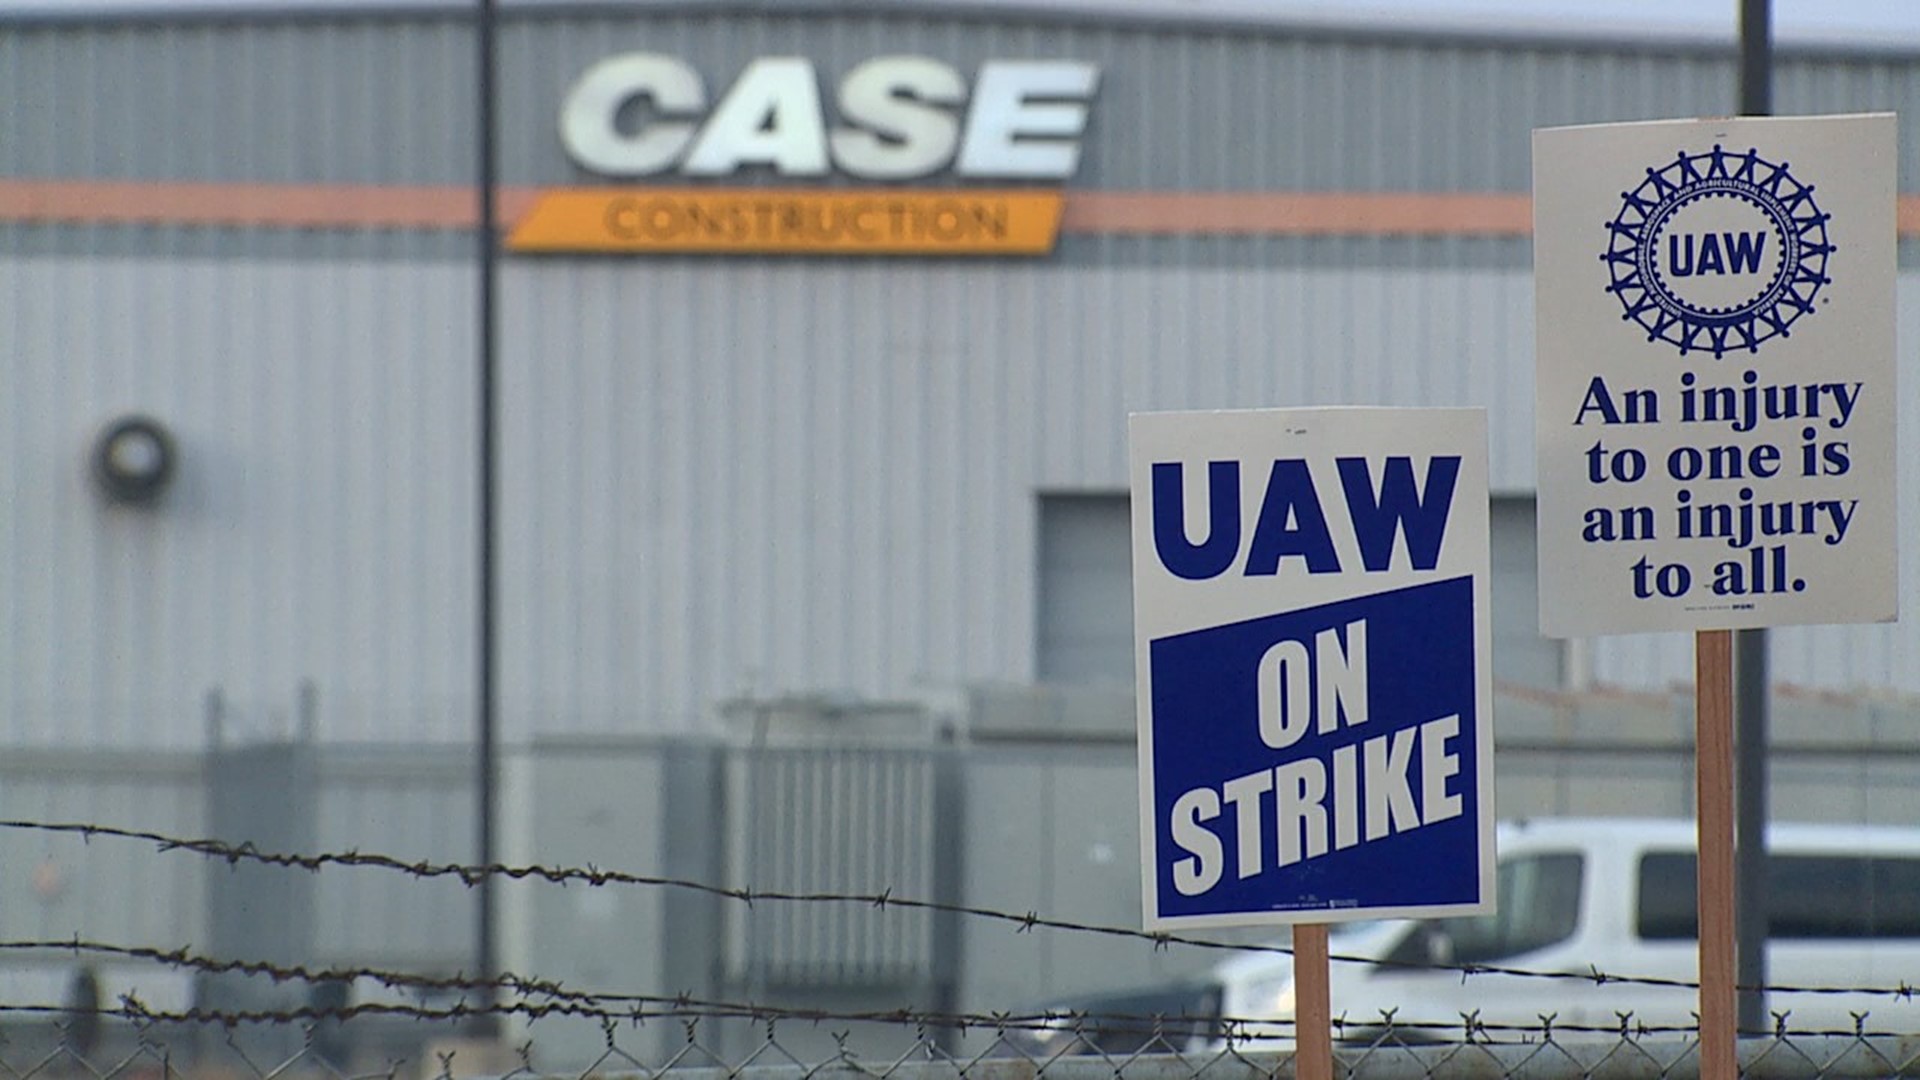 Despite being voted down 55% to 45%, Local 807 members on strike in Burlington tell News 8 that 75% of the local voted in favor of the contract offer on Saturday.